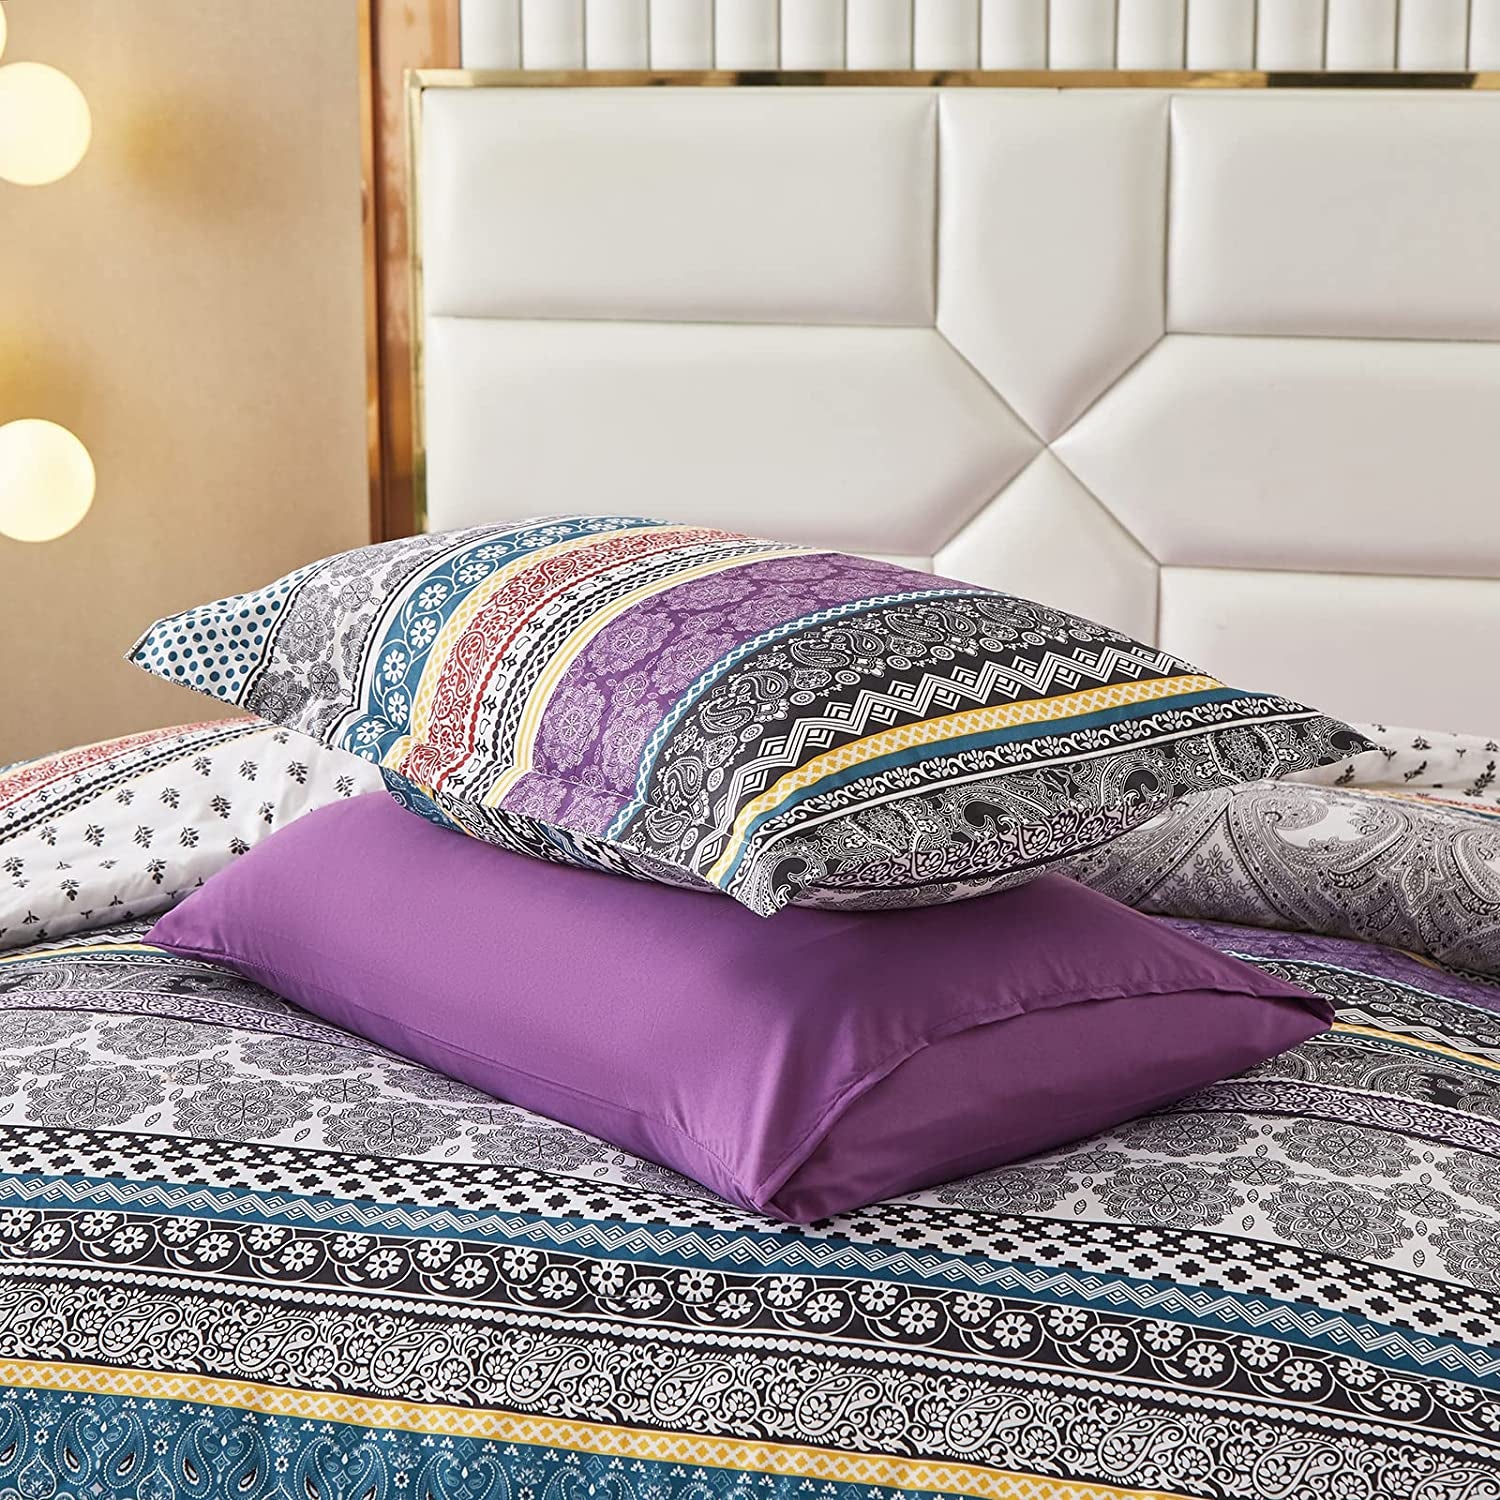 Boho Comforter Set Queen Size,8 Piece Bed in a Bag Bohemian Striped Bedding Quilt Set,Purple Paisley Floral Comforter and Sheet Set,Soft Microfiber Complete Bedding Sets for All Season